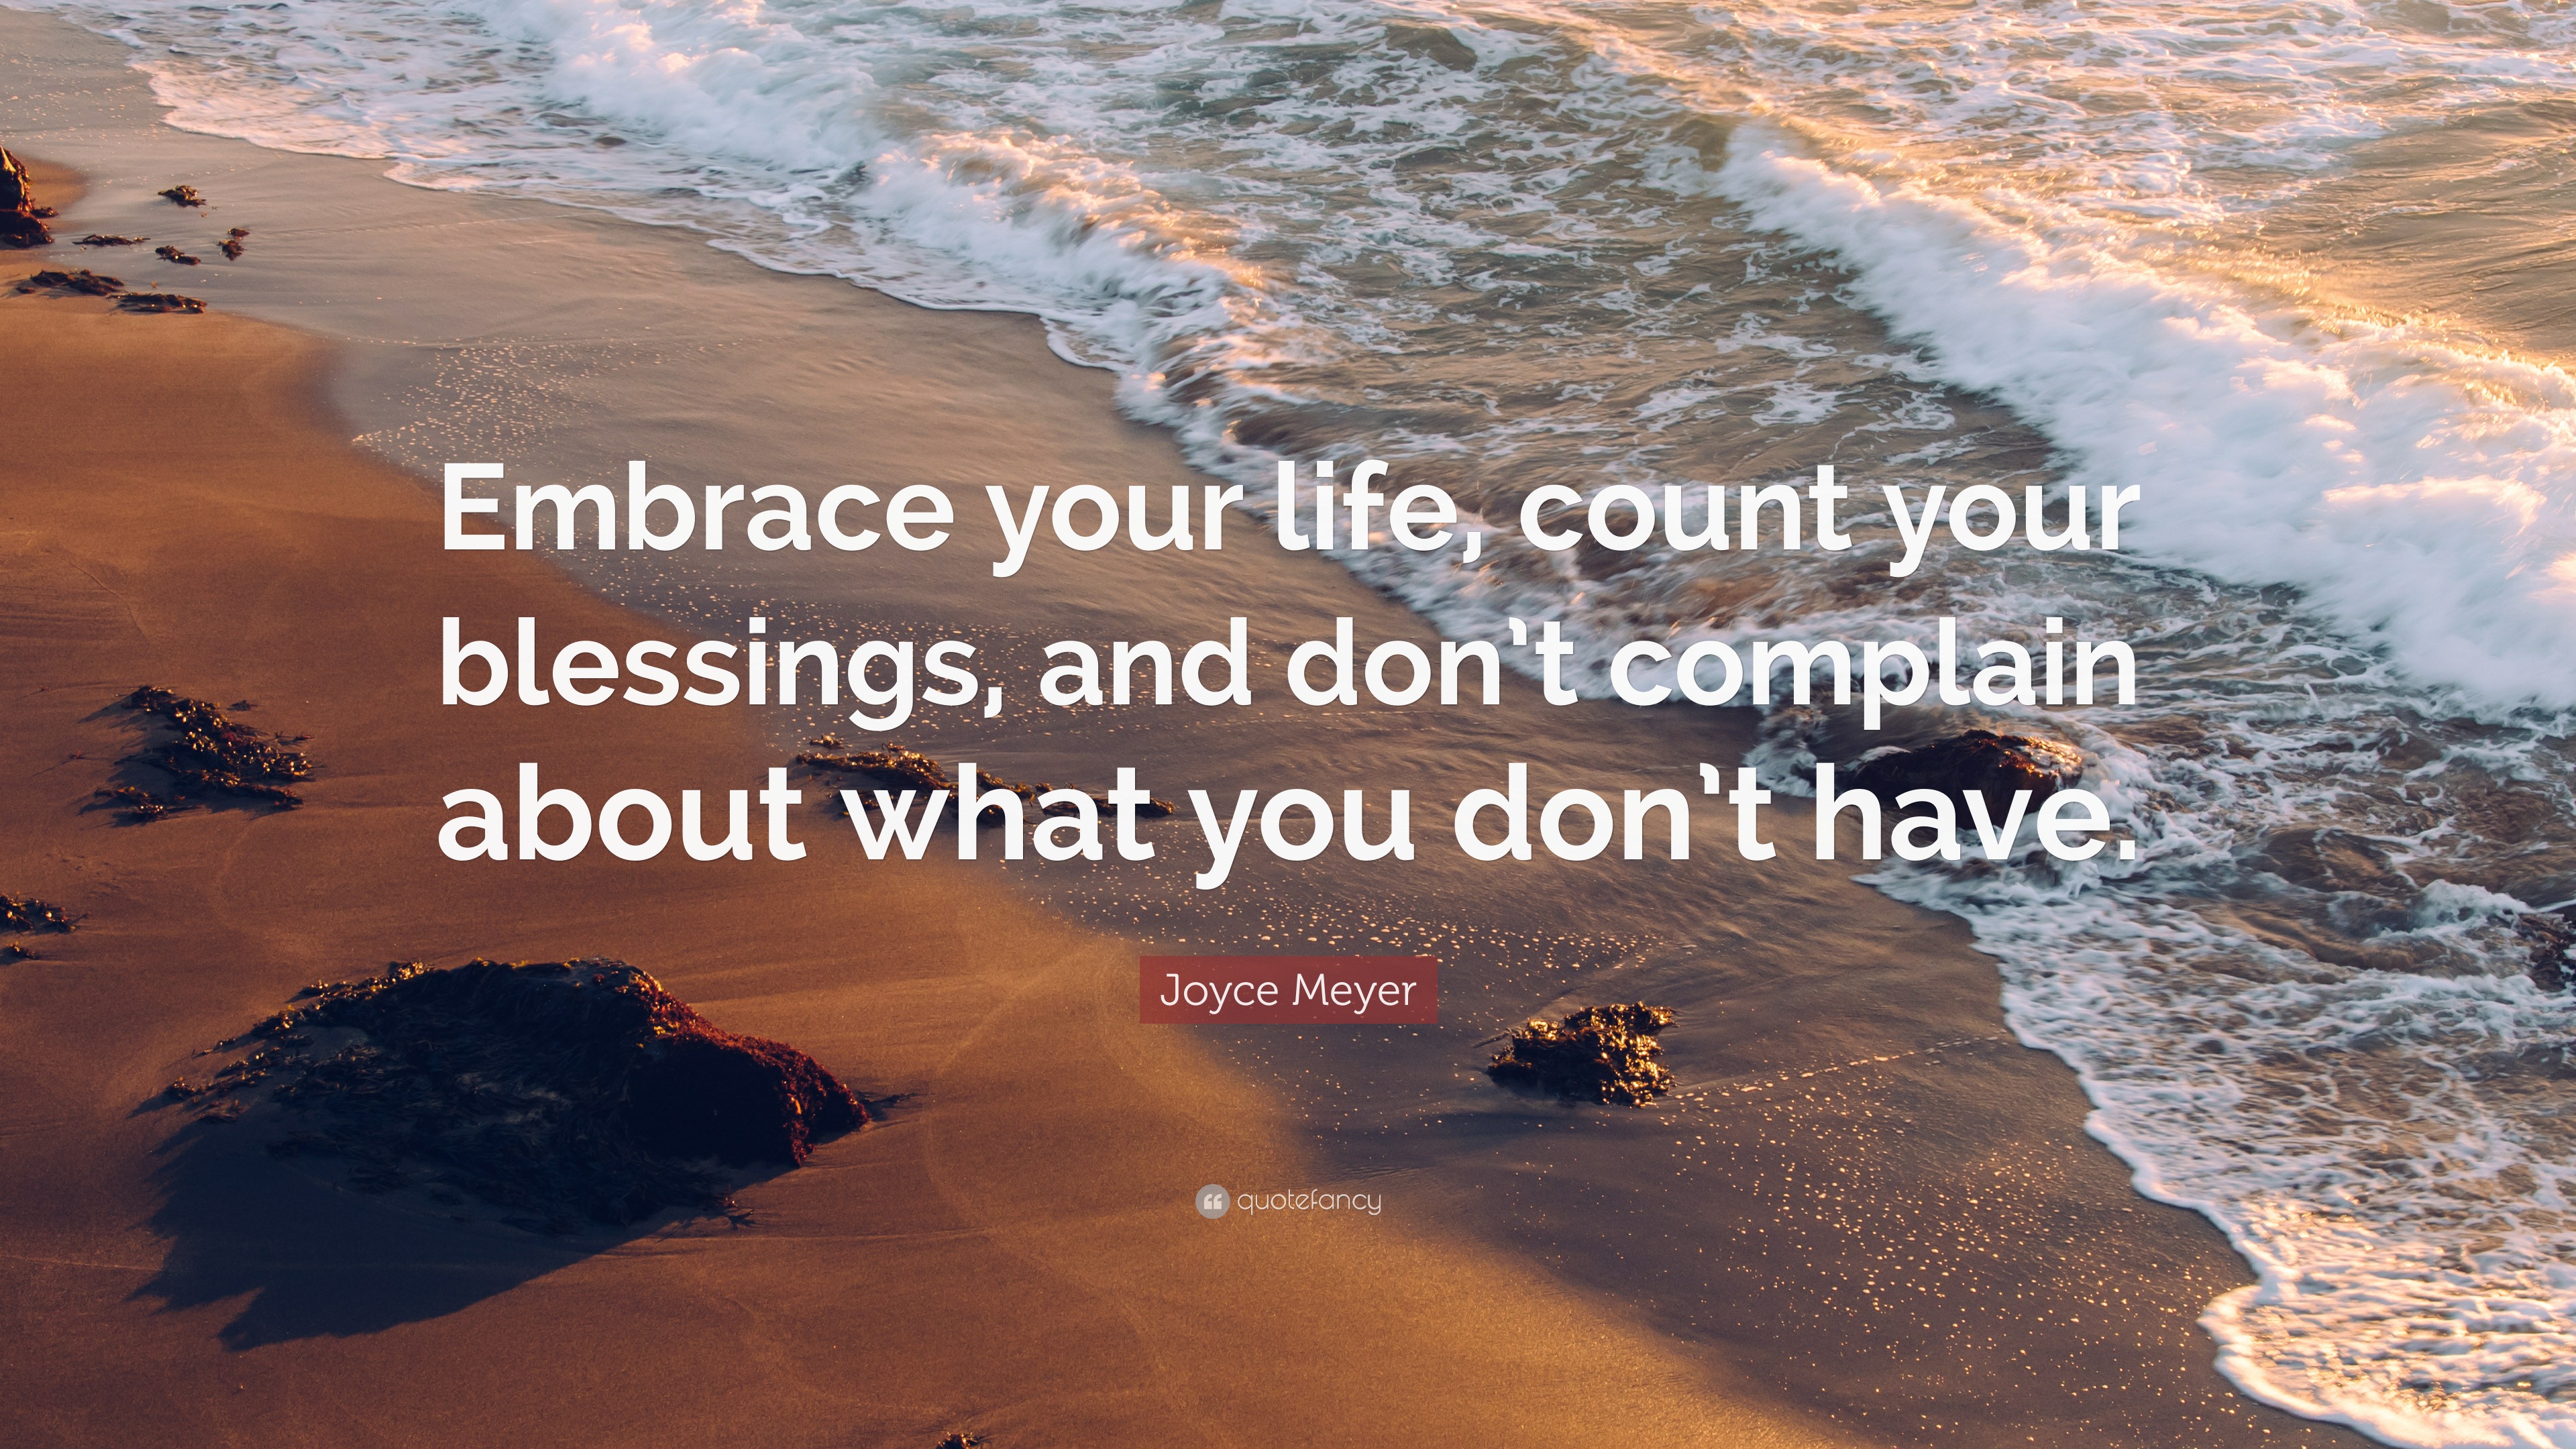 Joyce Meyer Quote: “Embrace your life, count your blessings, and don’t